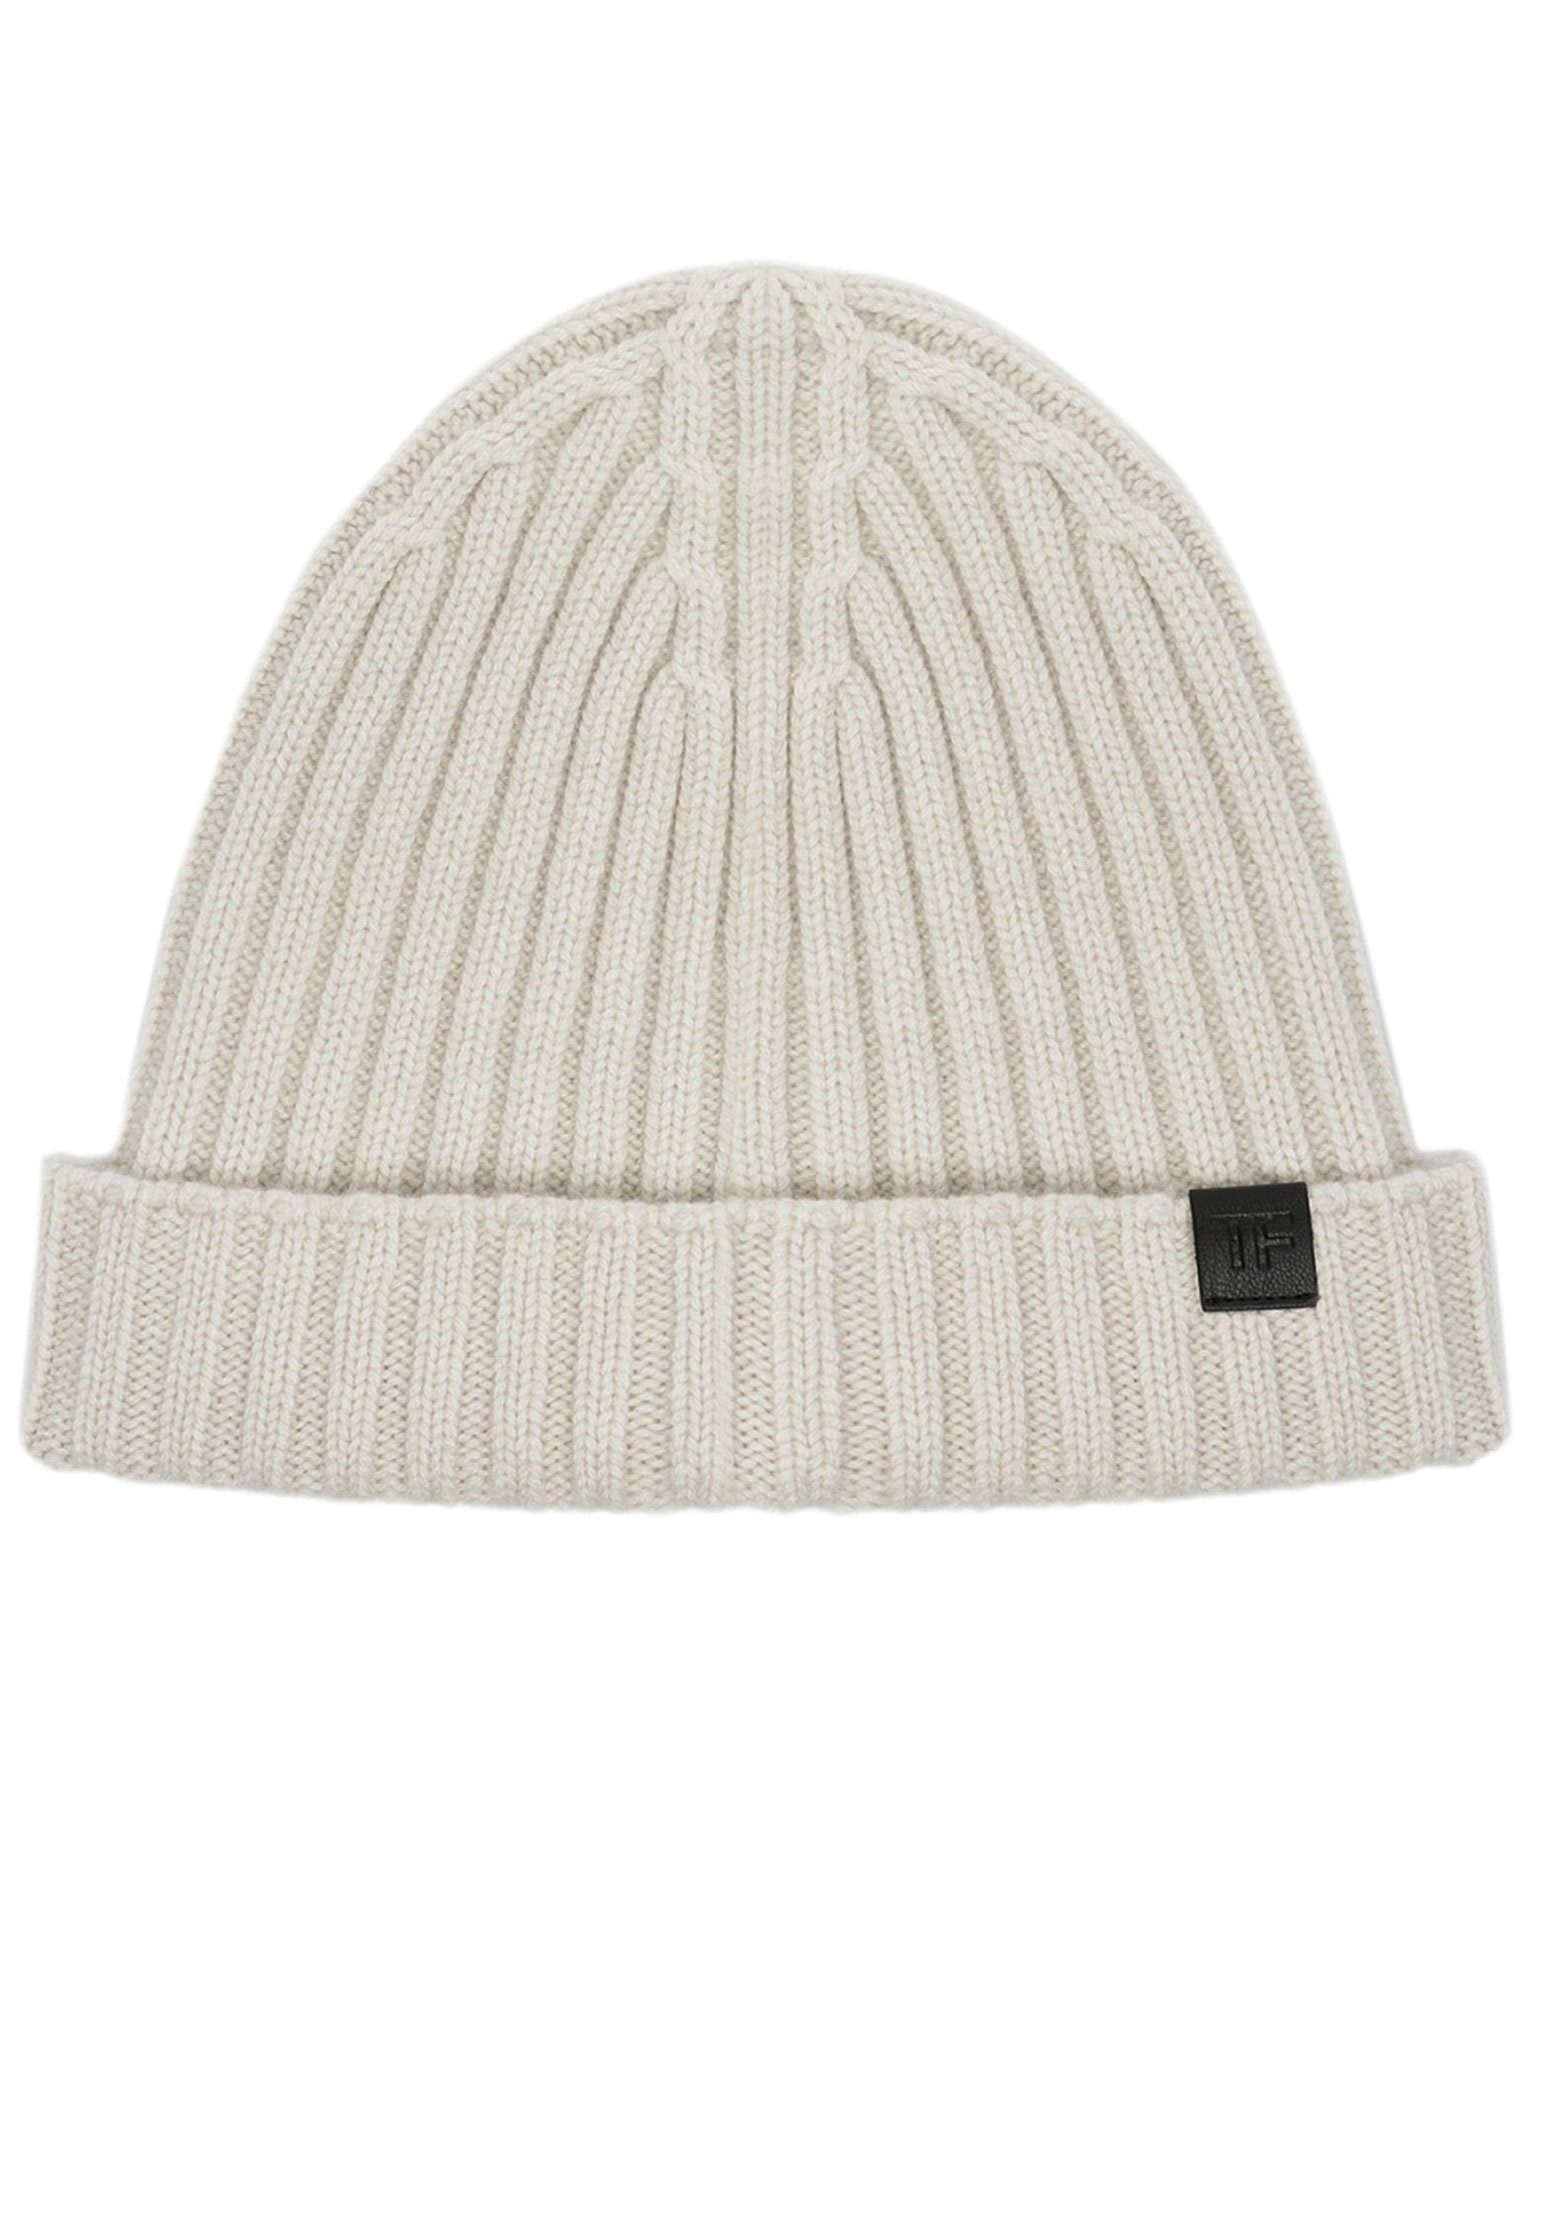 Hat TOM FORD Color: beige (Code: 1924) in online store Allure